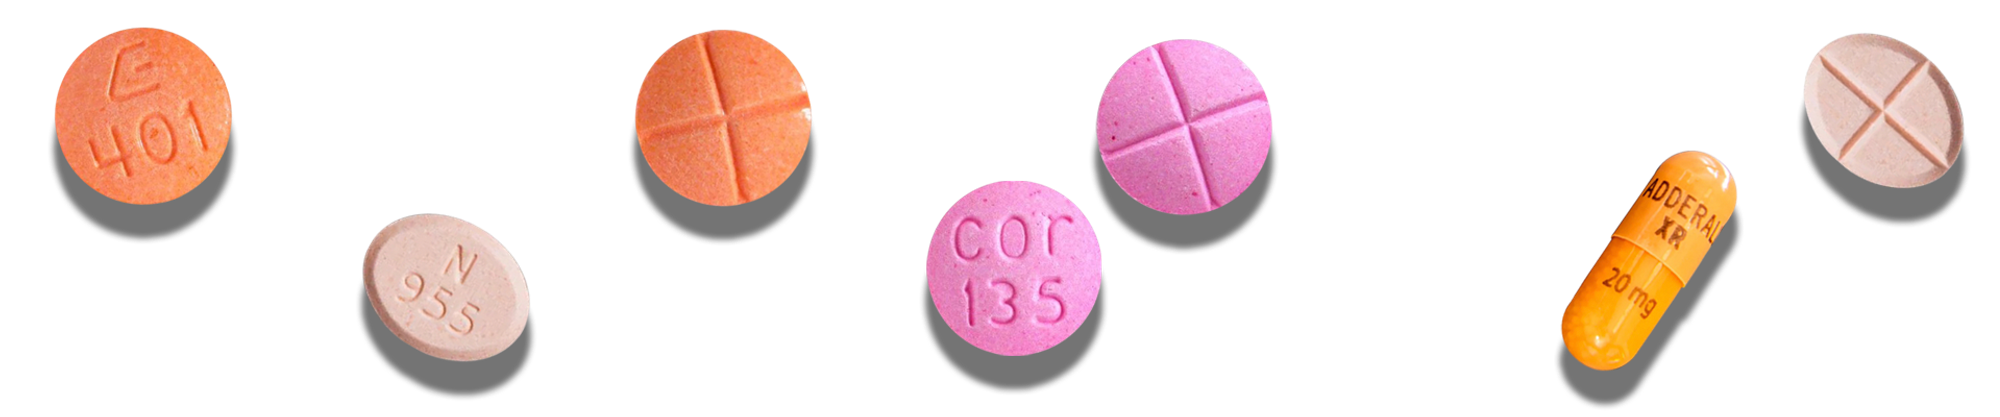 Adderall pills of different shapes and sizes, positioned in an alternating pattern.